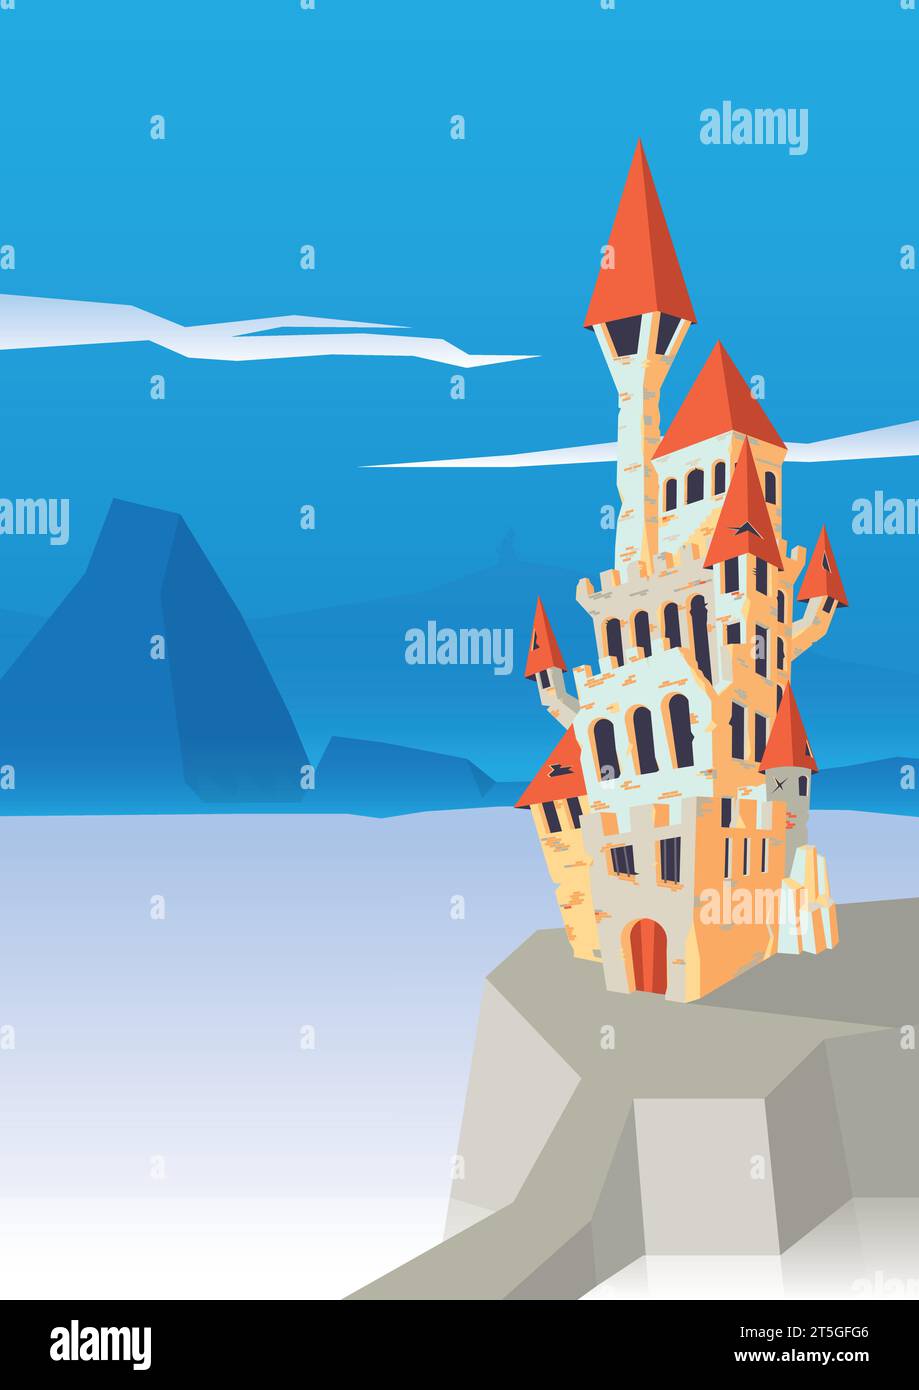 Castle Vector Illustration: Intricate Fort on Hilltop, Perfect for Customization Stock Vector